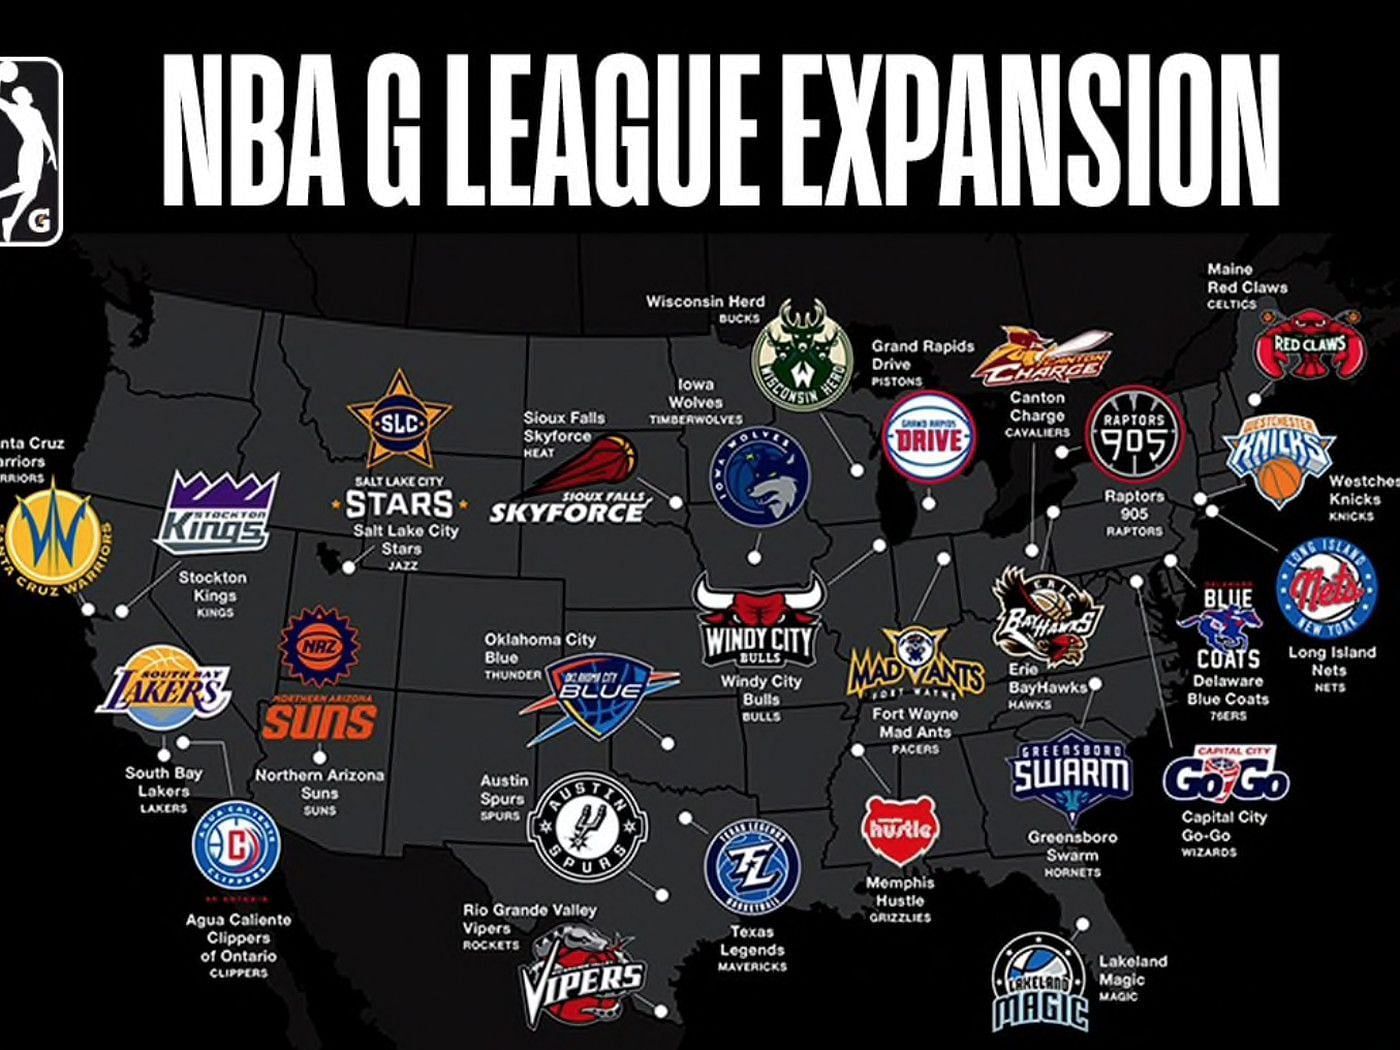 I. Introduction to the NBA's Expansion Years